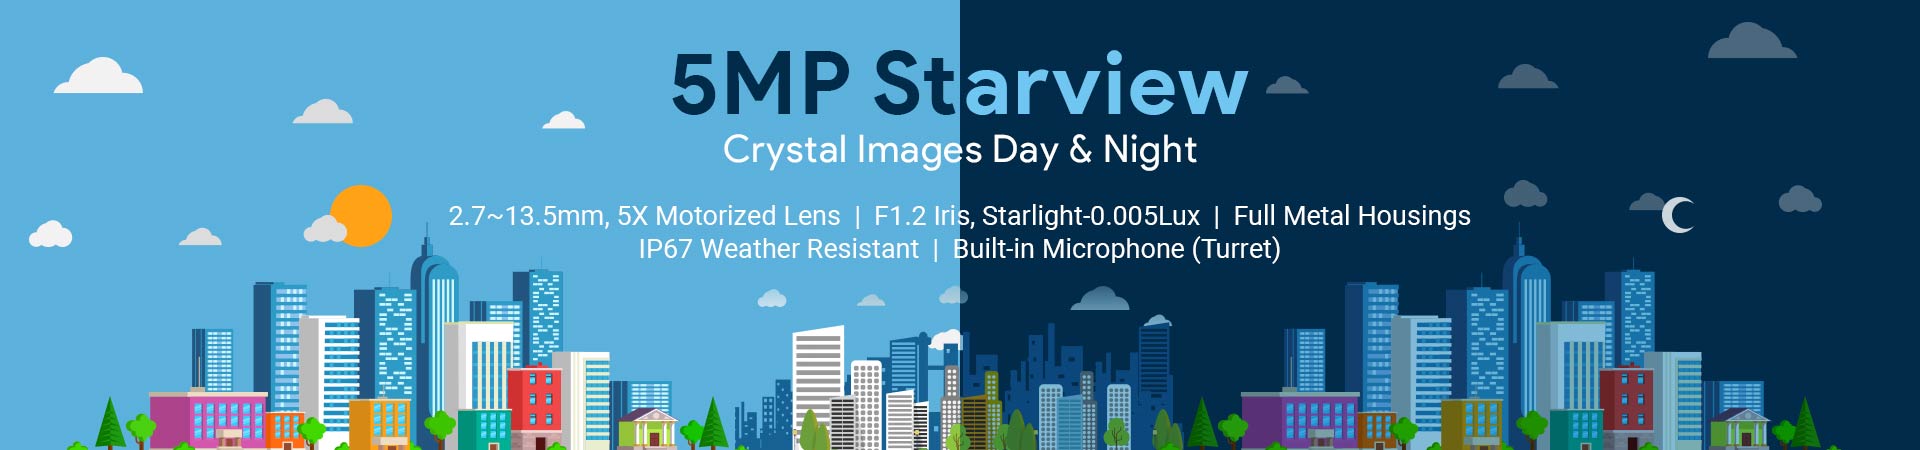 5MP Starview Products